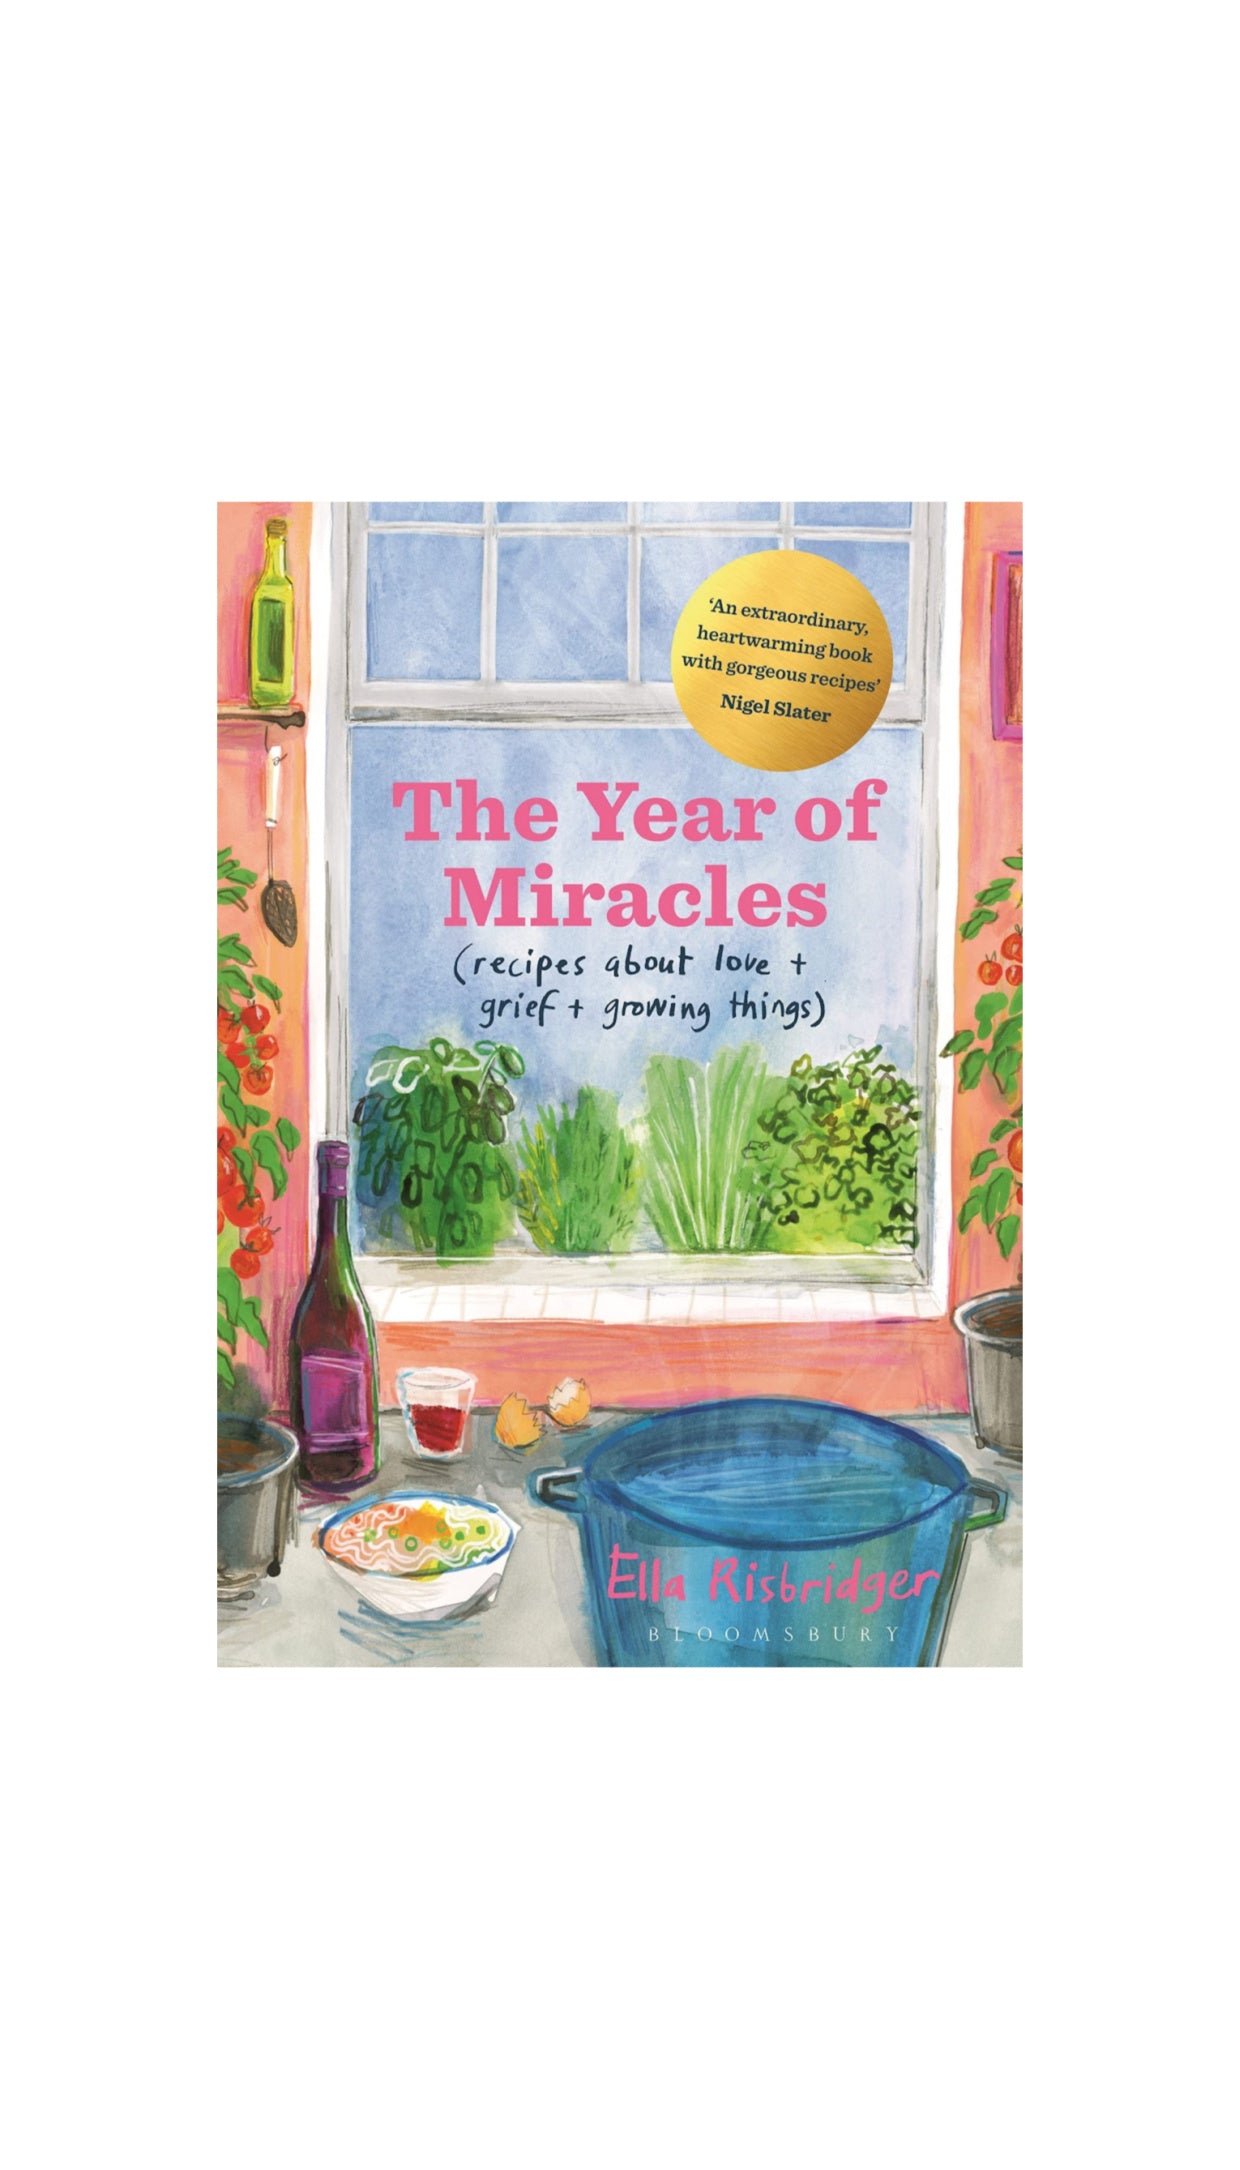 The Year of Miracles